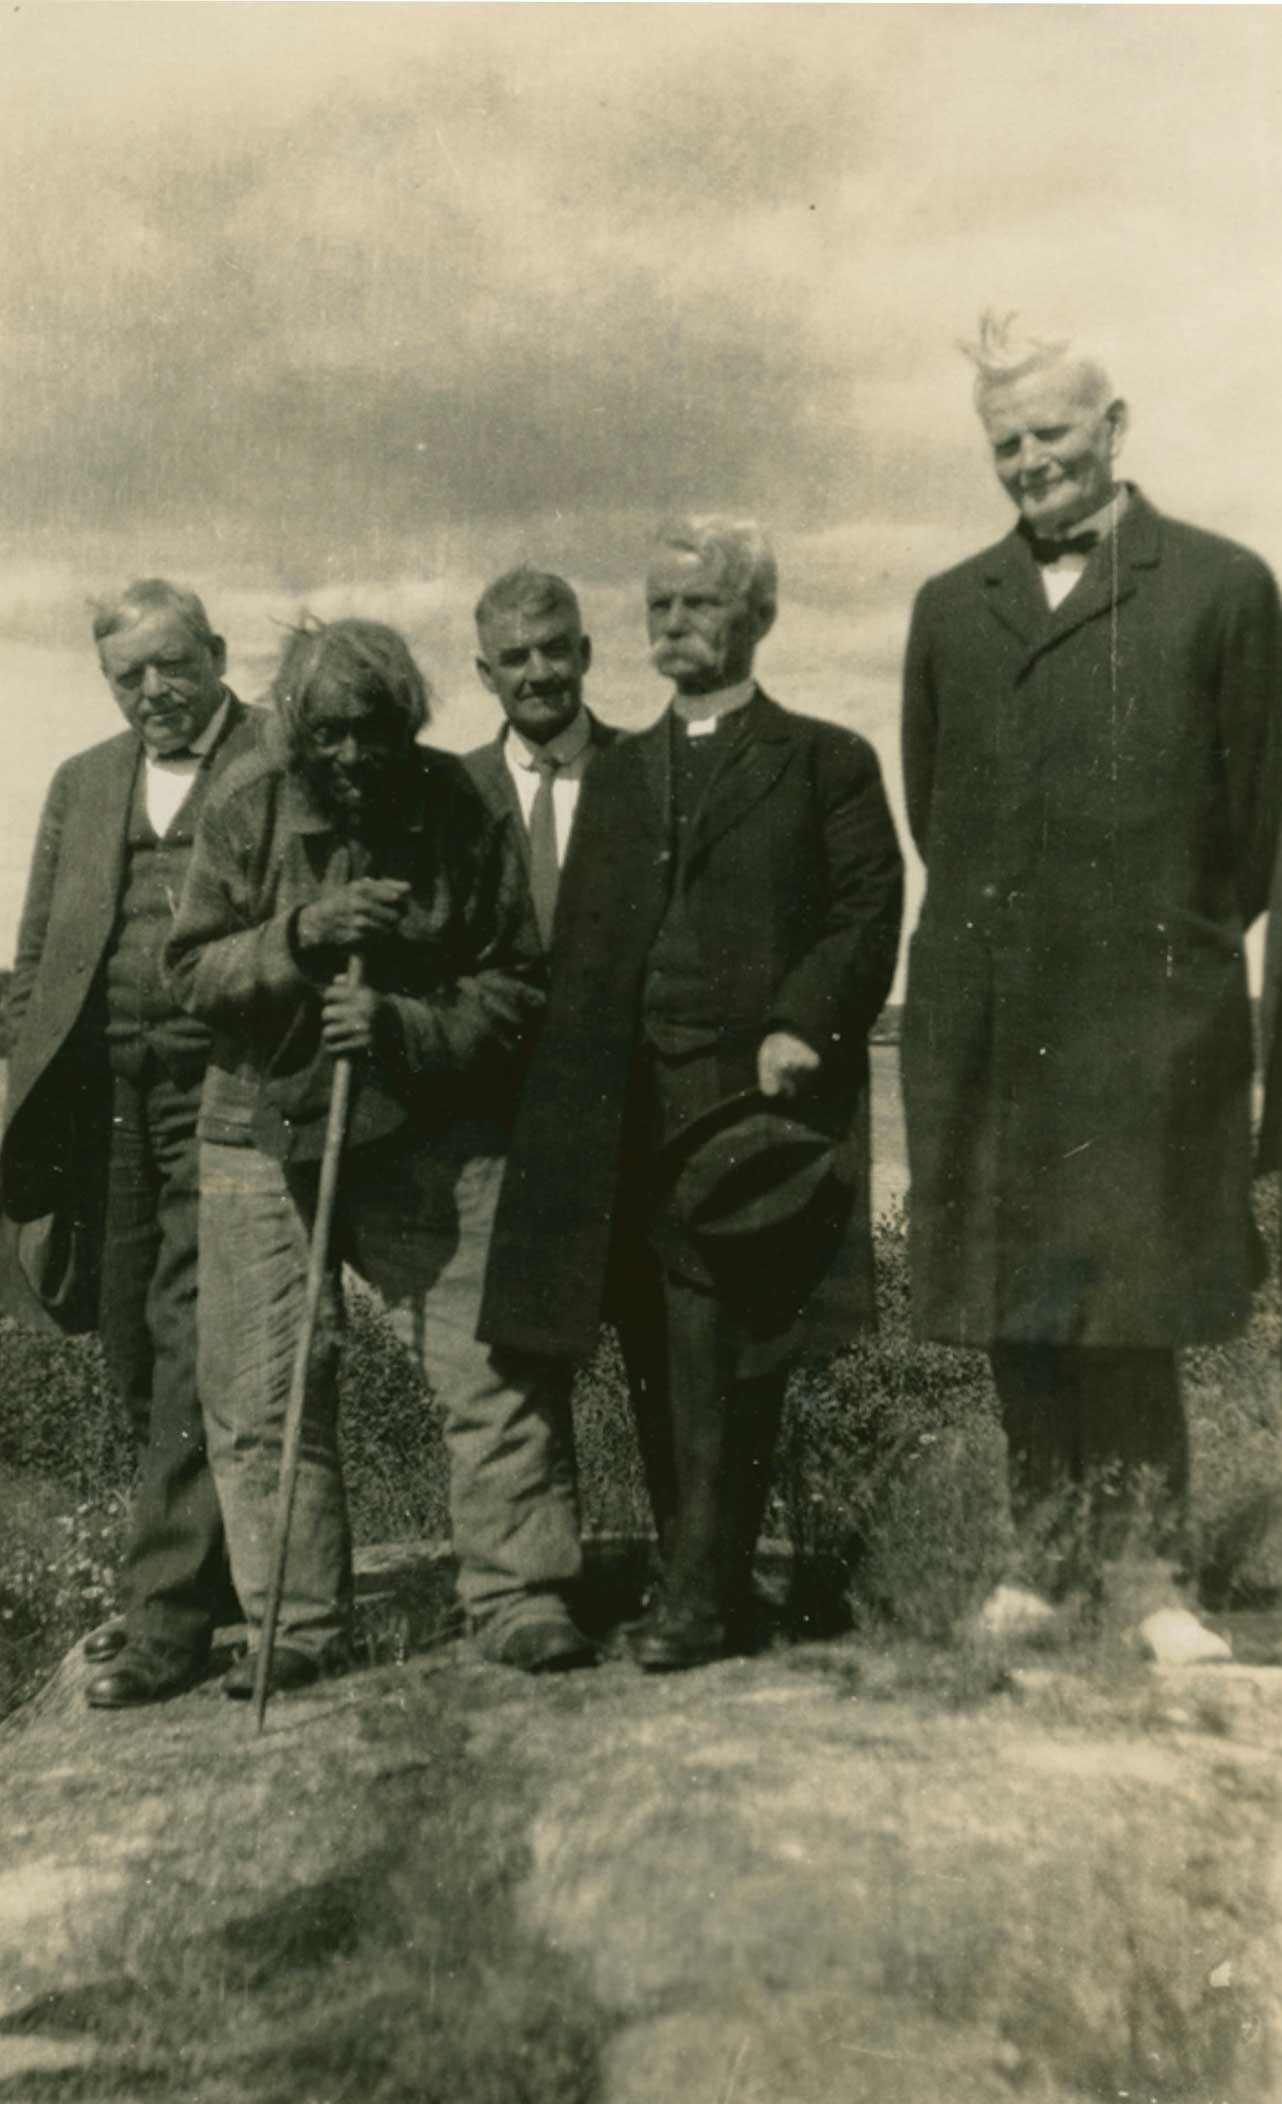 John Memeno, the last Cree Indian to remember James Evans, with church leaders at Norway House, Manitoba, 1925. Chown at the right.